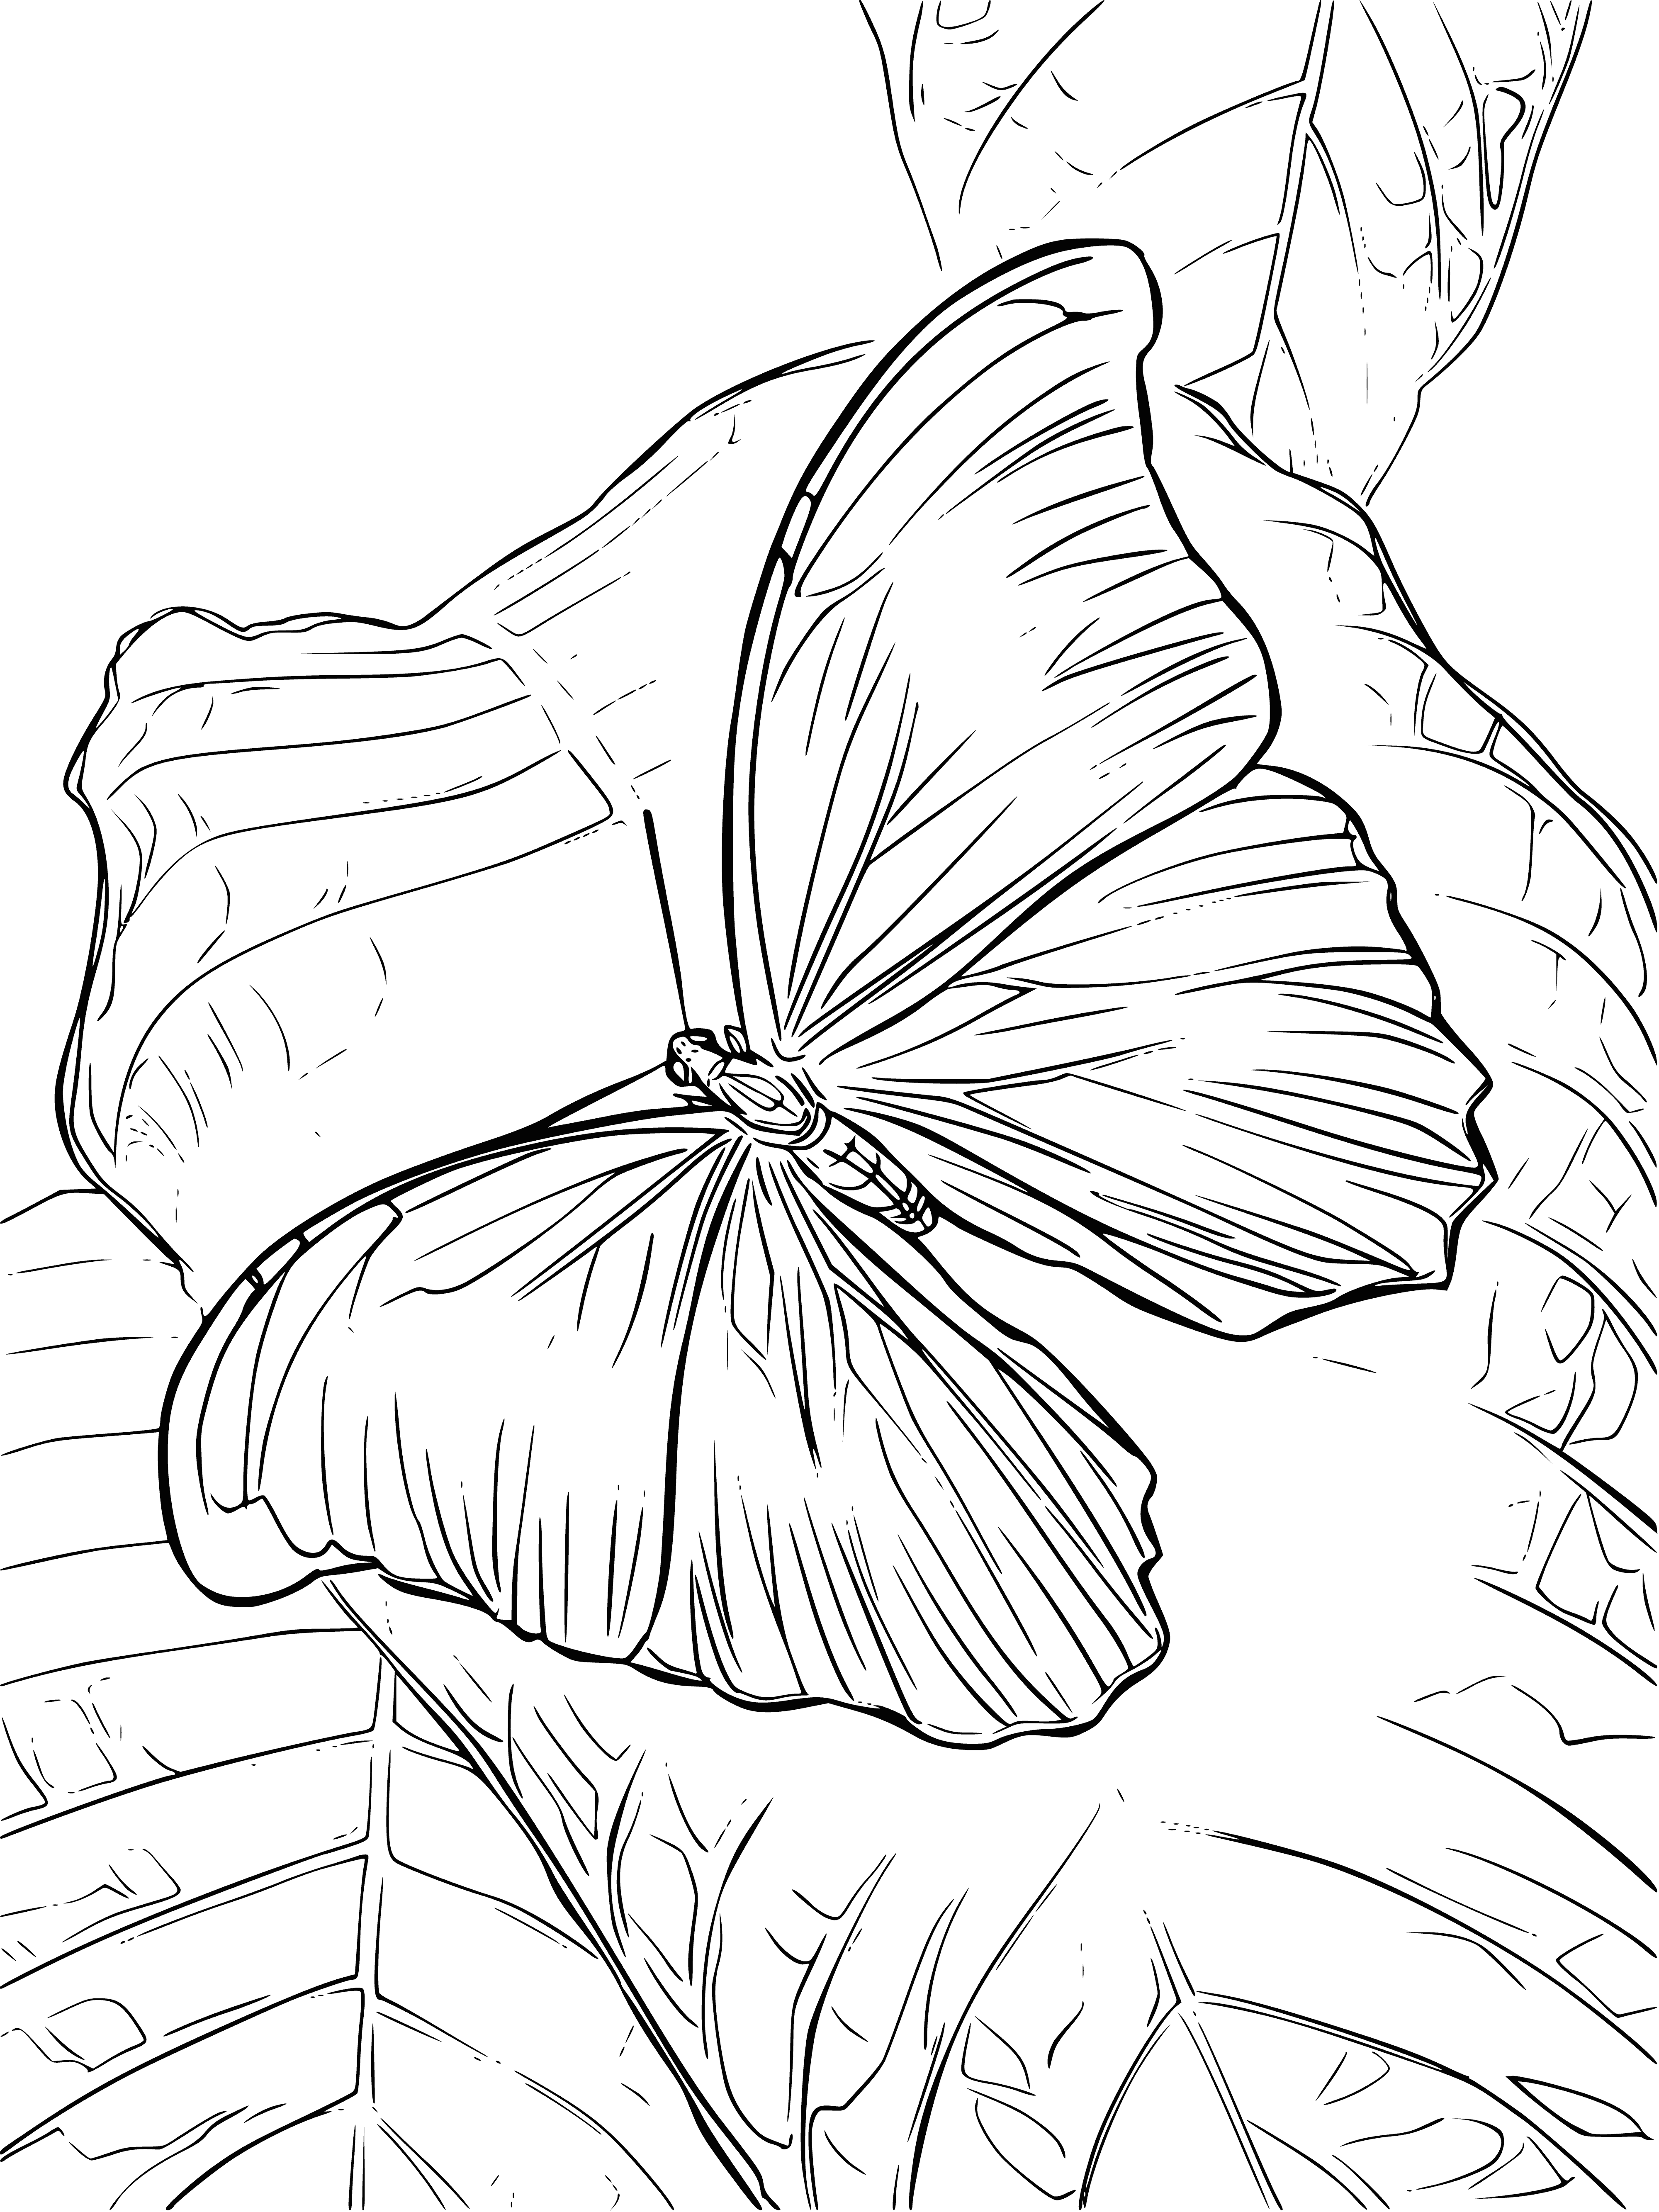 coloring page: Butterfly rests atop green leaf, revealing intricate patterns on wings. Dark body w/ lighter stripes & long, thin antennae curling up at tips.